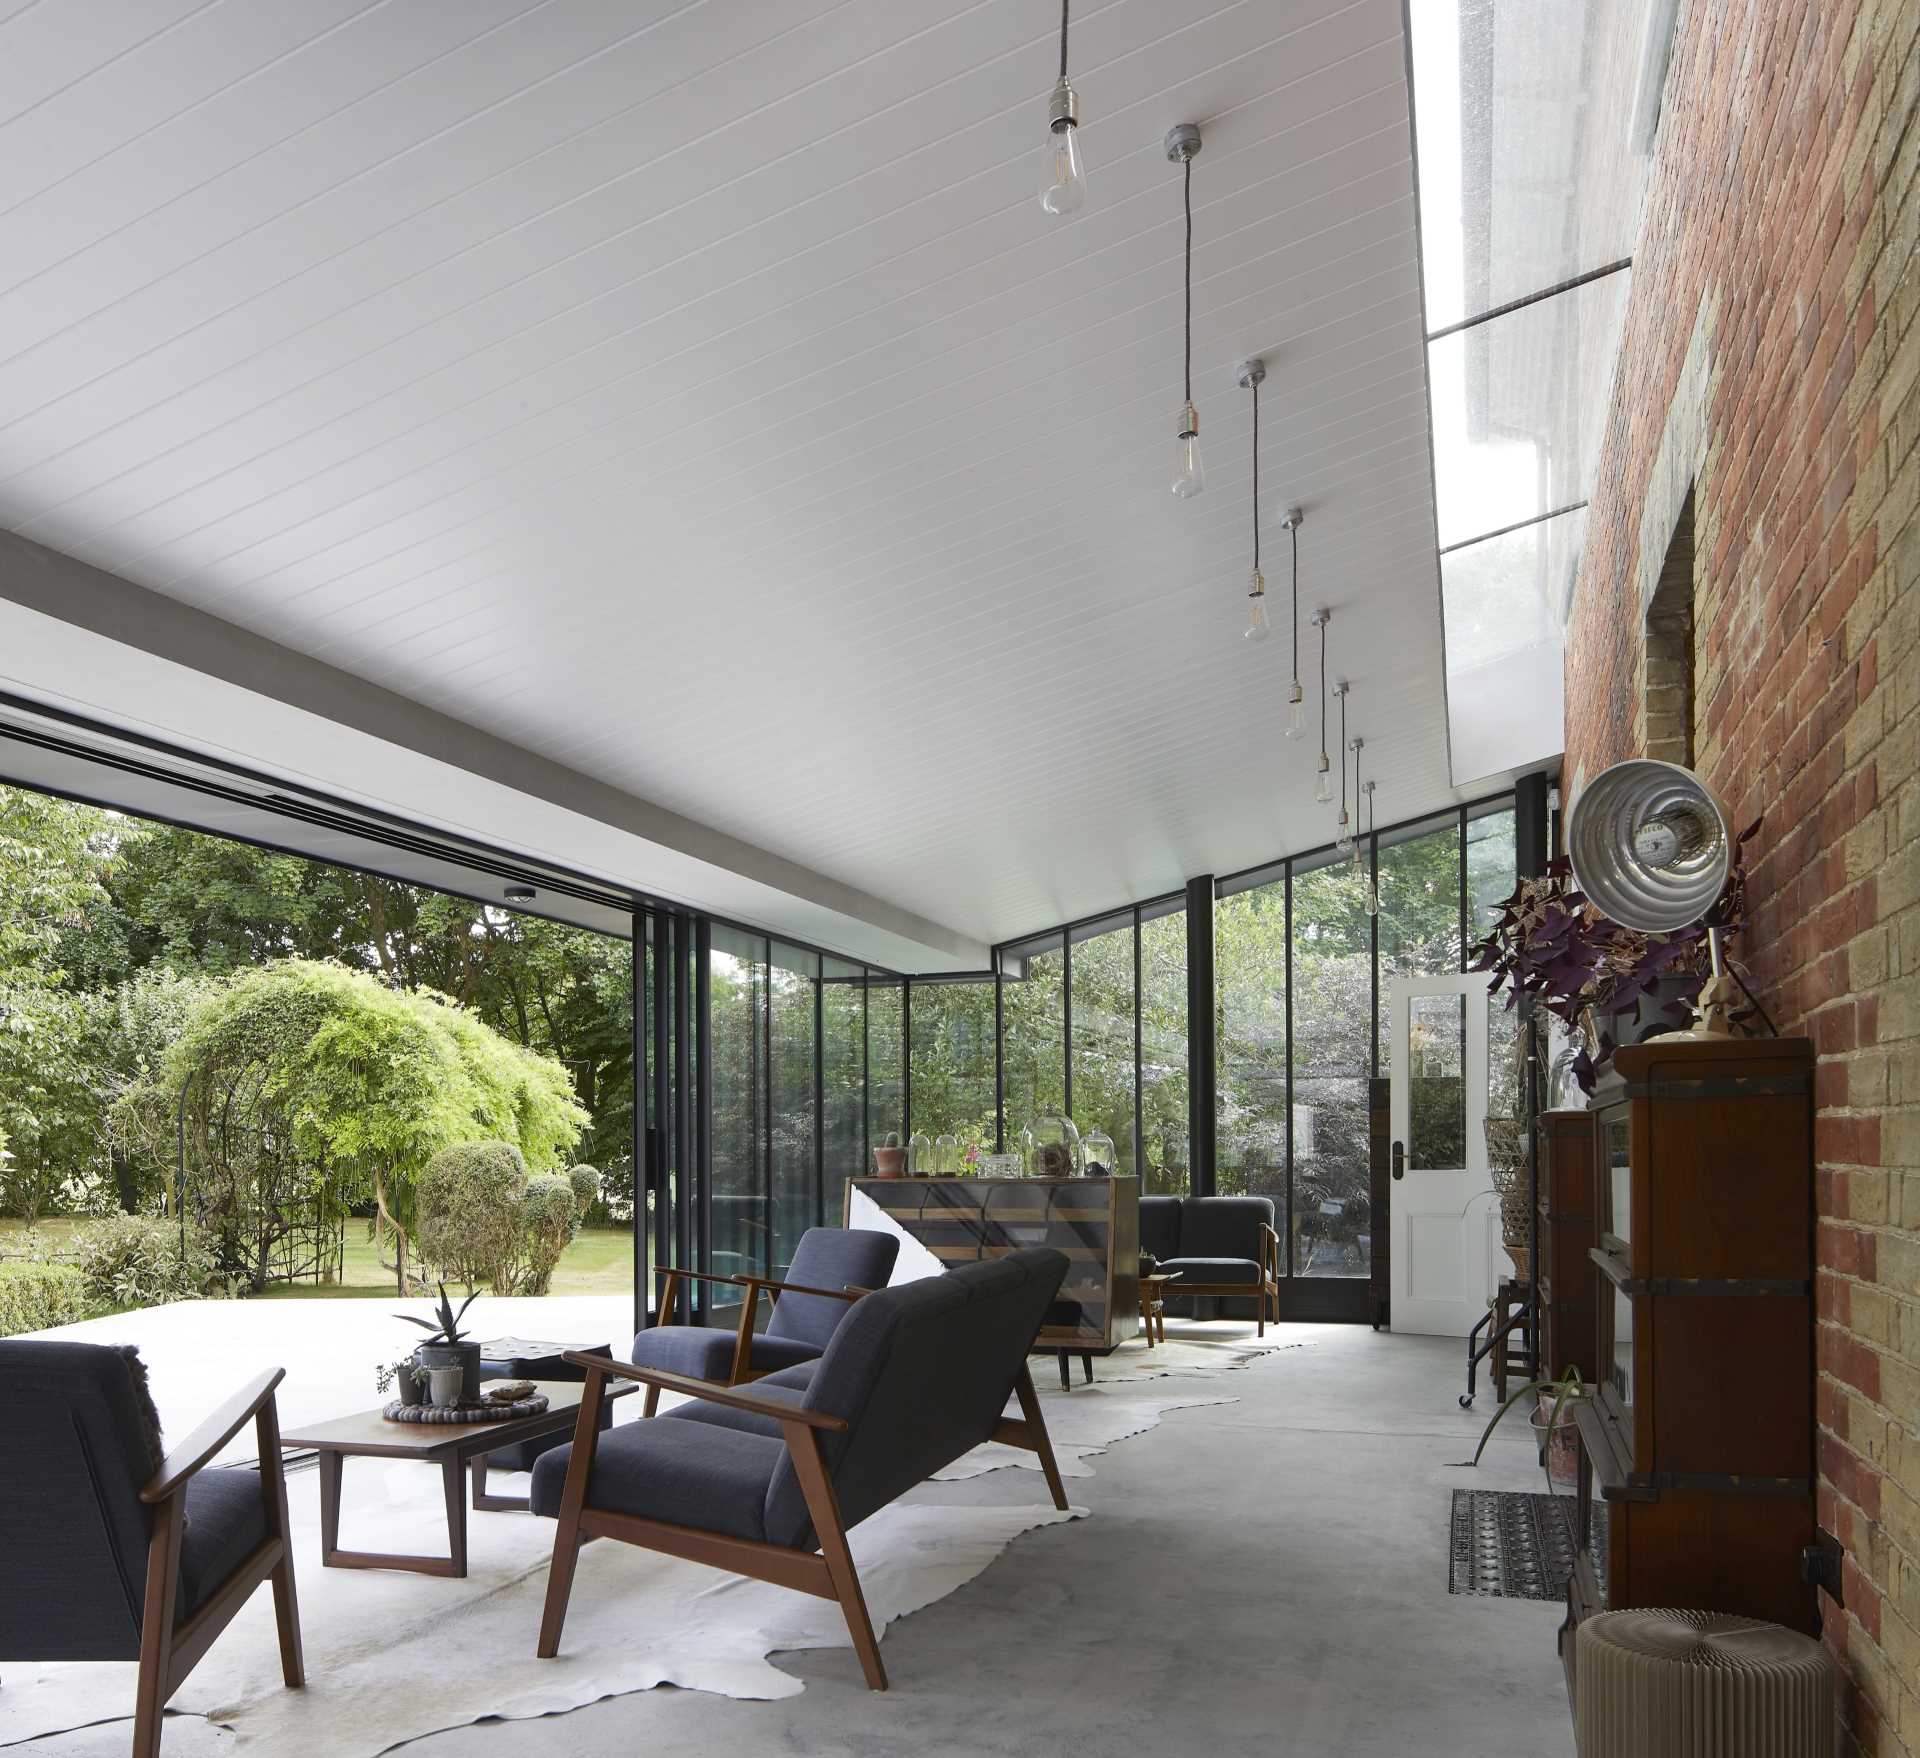 A modern house extension has sliding glass walls that open the living spaces to the landscaped garden.